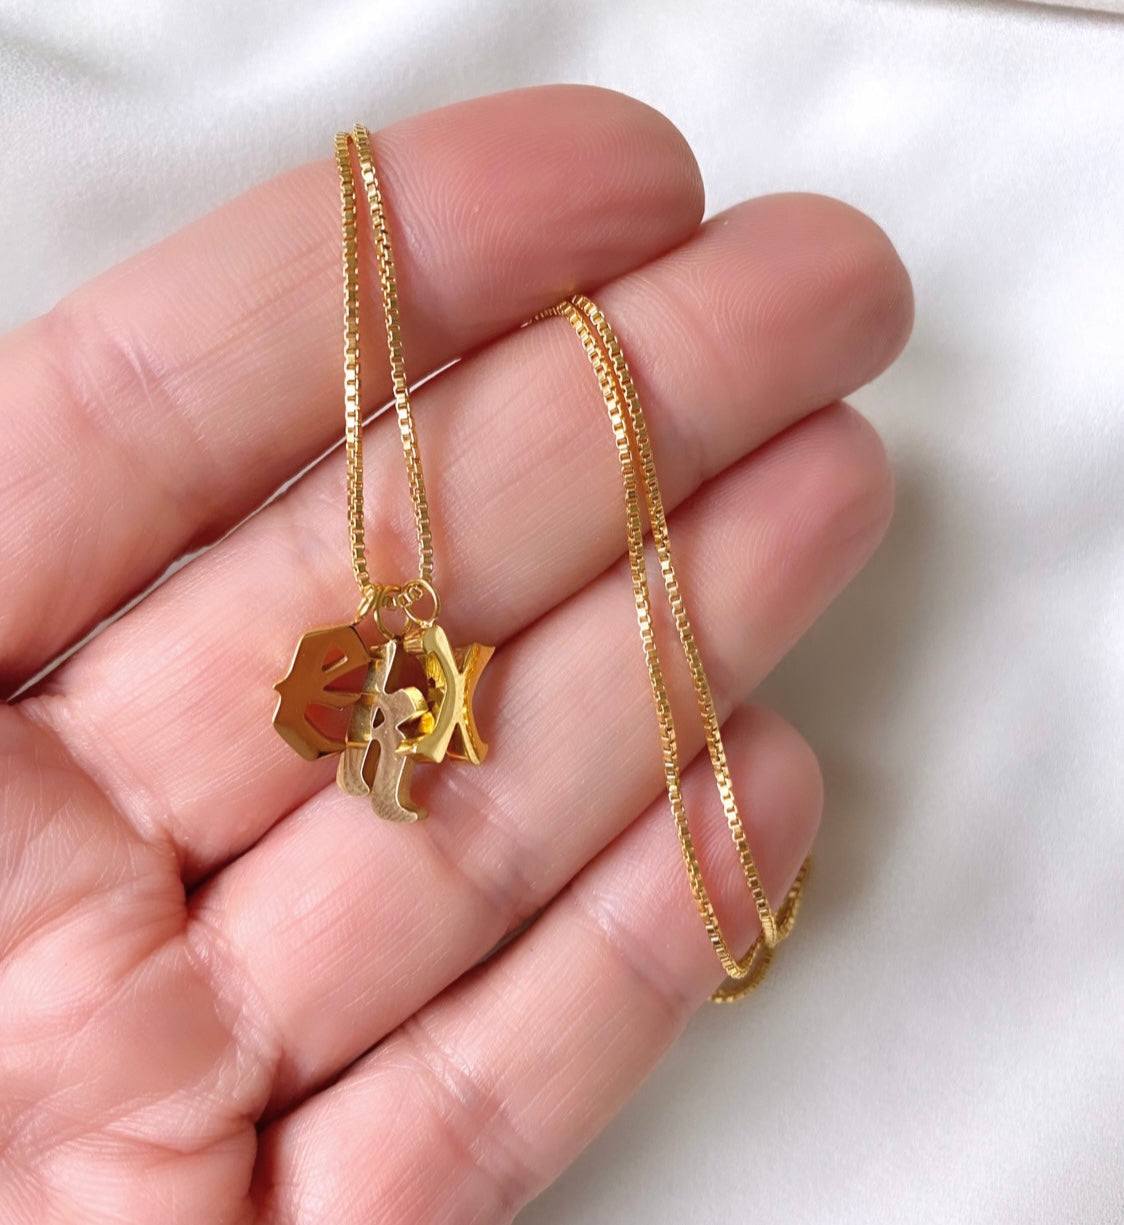 Gold Filled Old English Letter Necklace {16 to 18 inches}